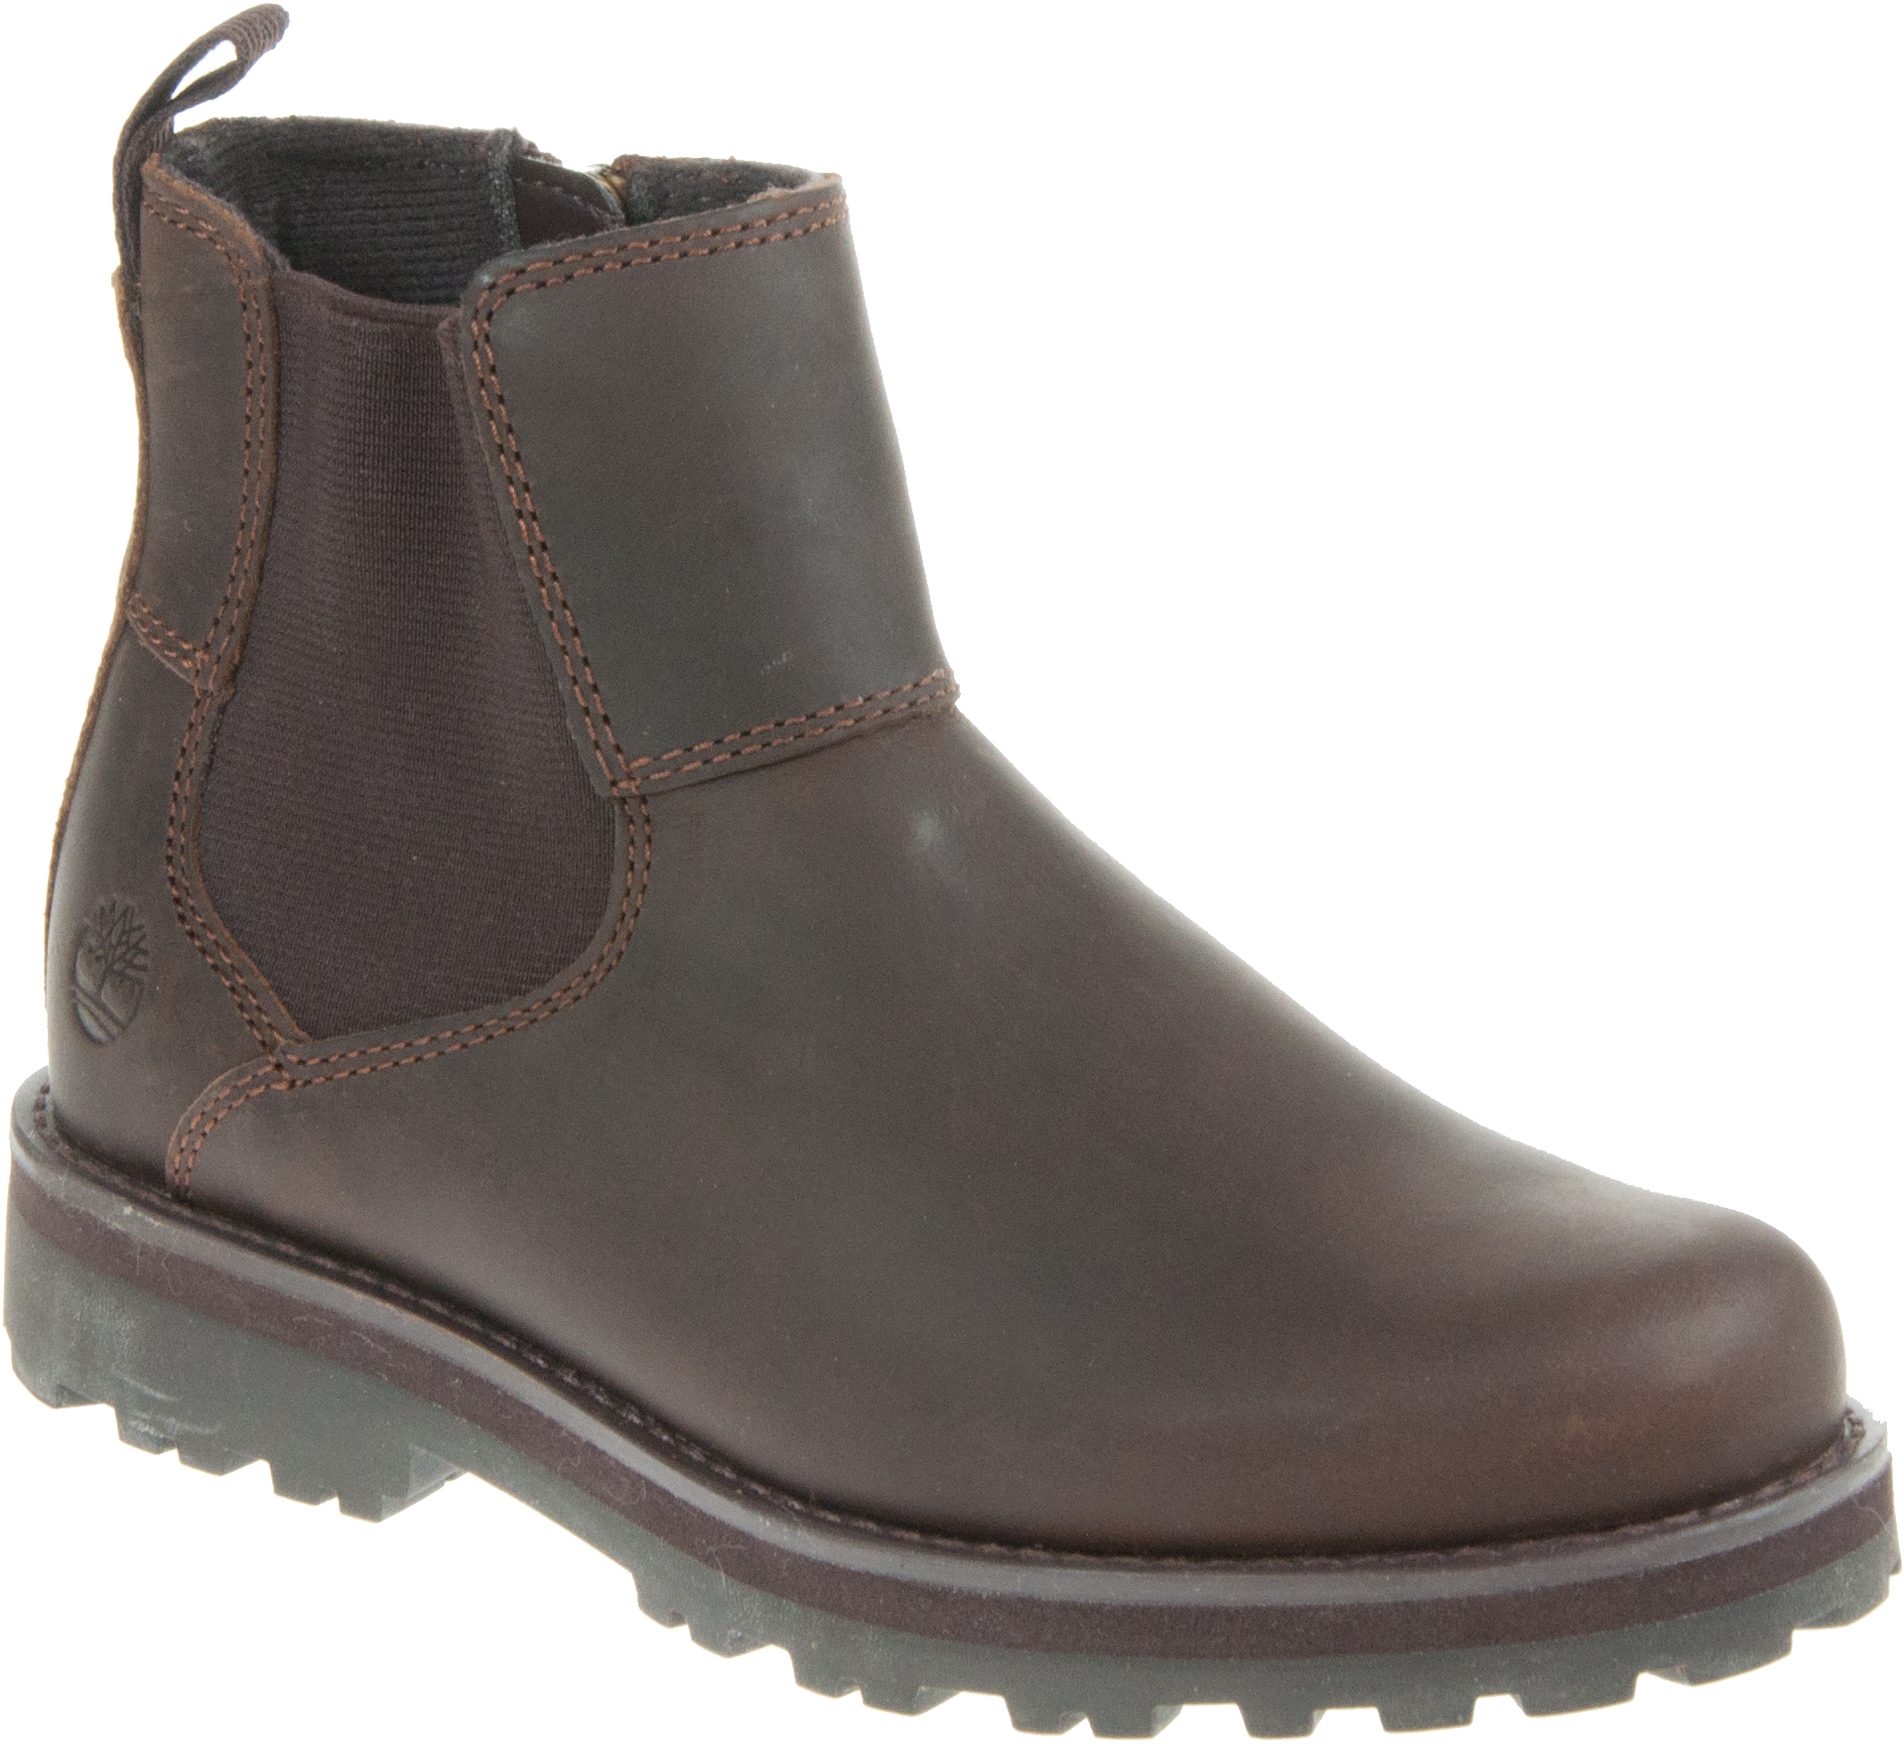 Dark 931 - Timberland Boys Youths Chelsea A25GK Boots - Kid Humphries Shoes Courma Brown